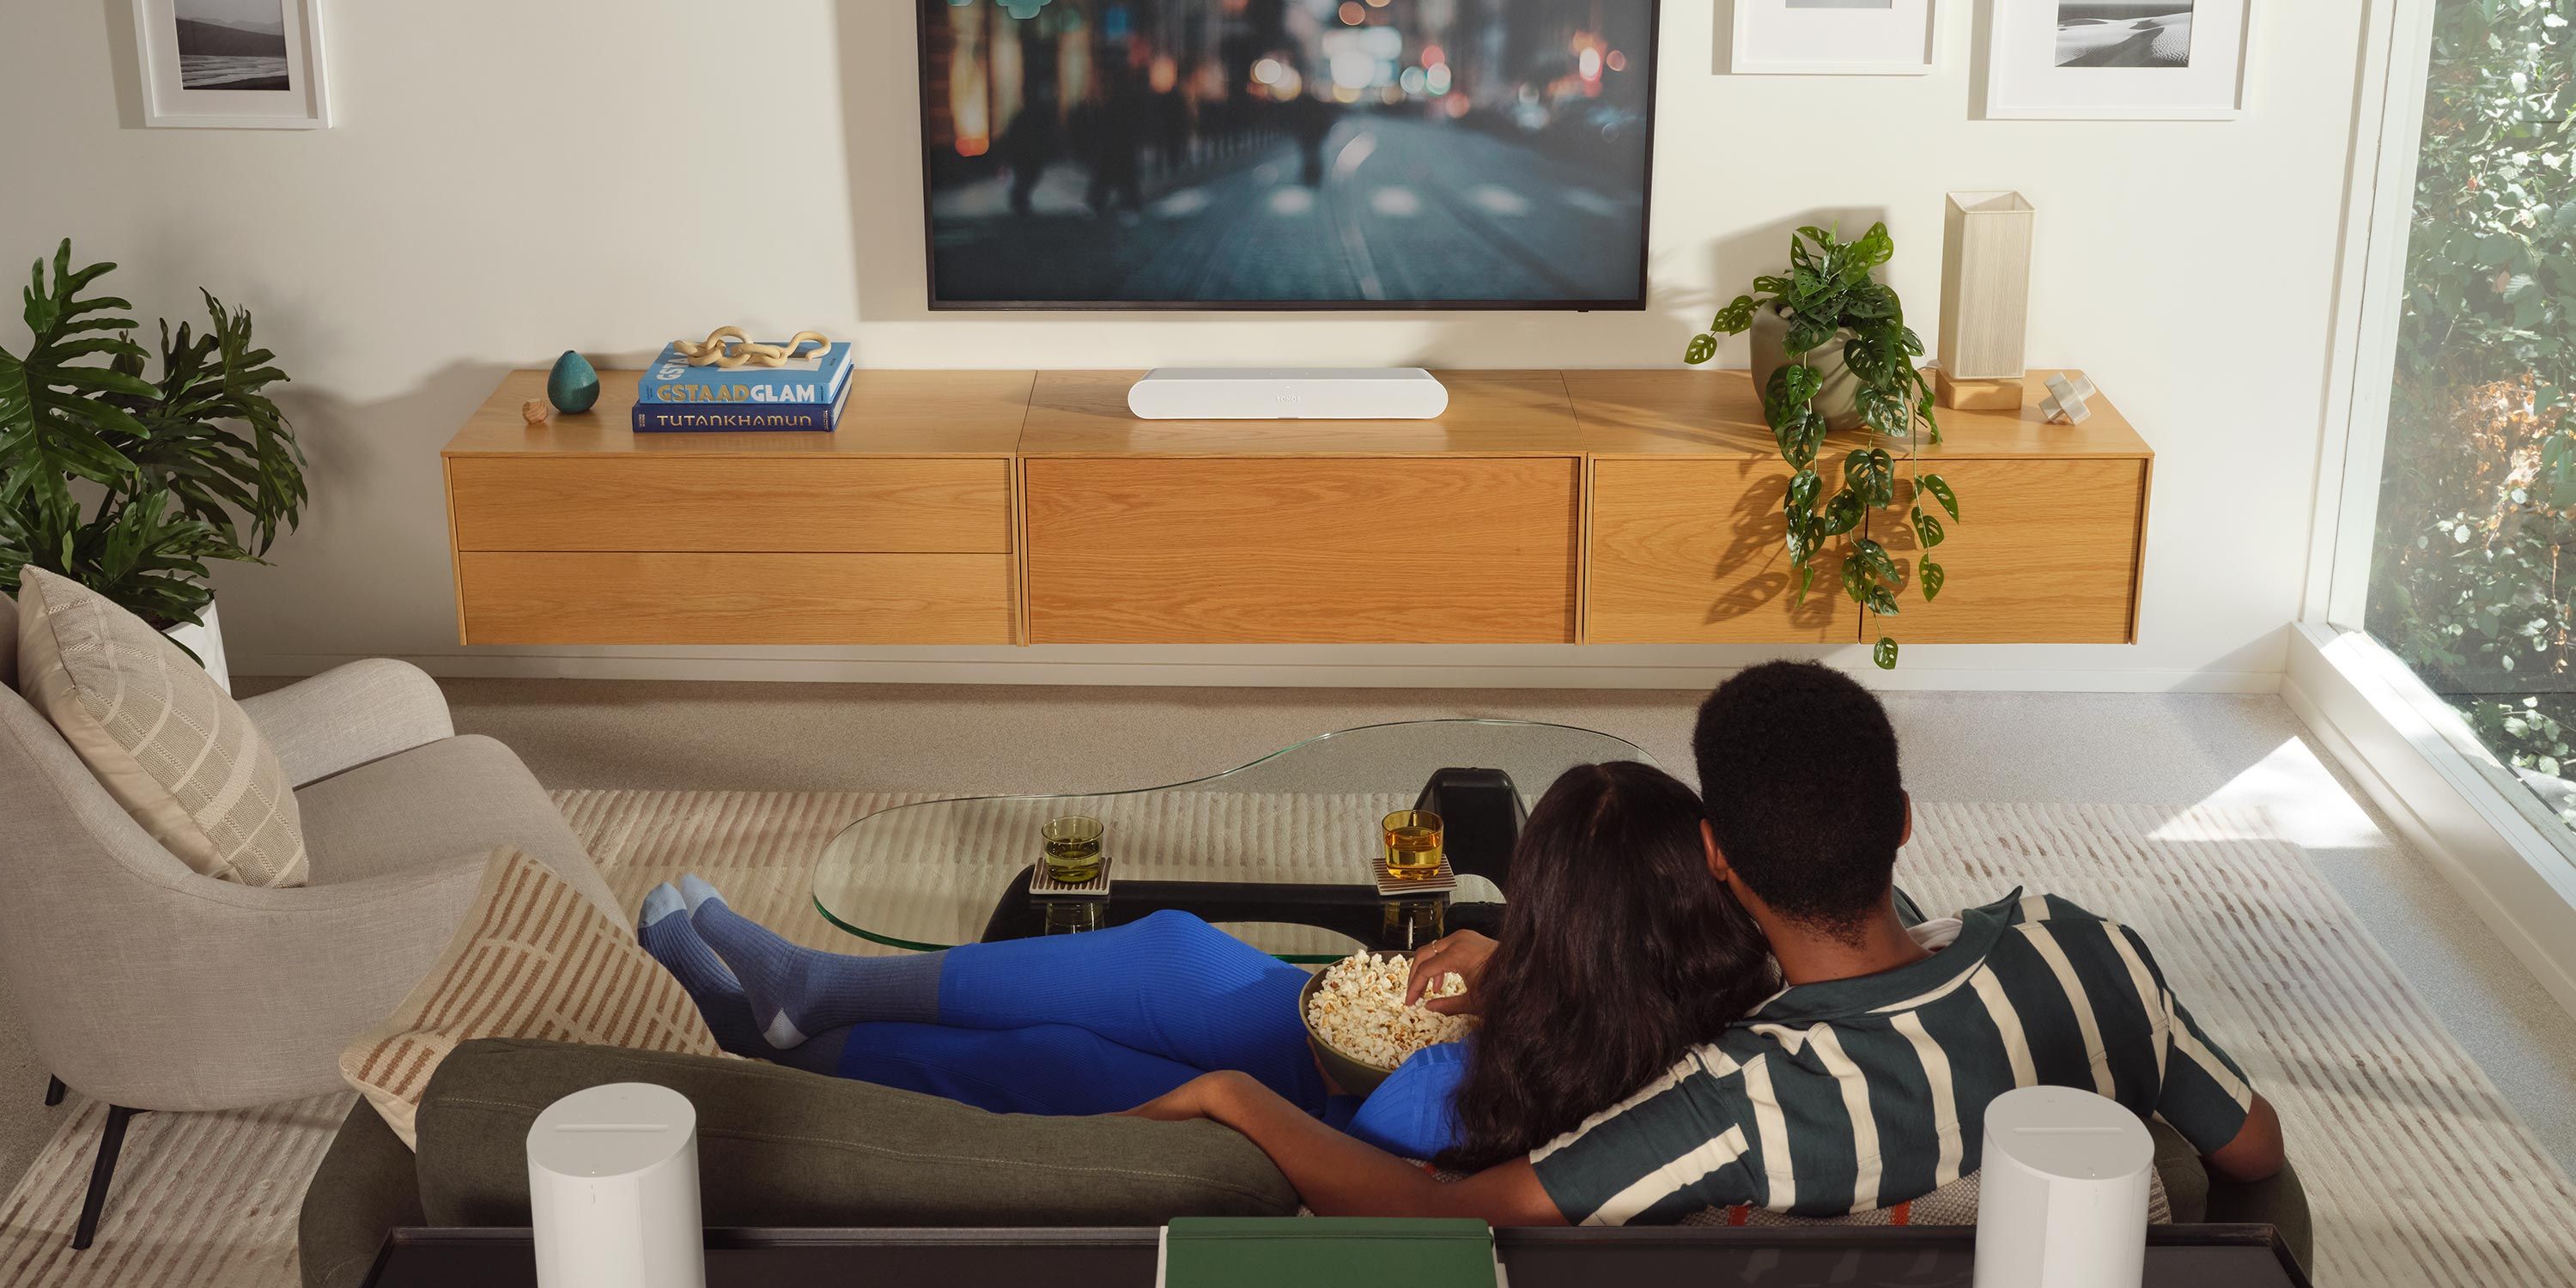 A cozy media room with a couple sitting on a sofa, watching a large wall-mounted TV, with a modern console and decorative plants.